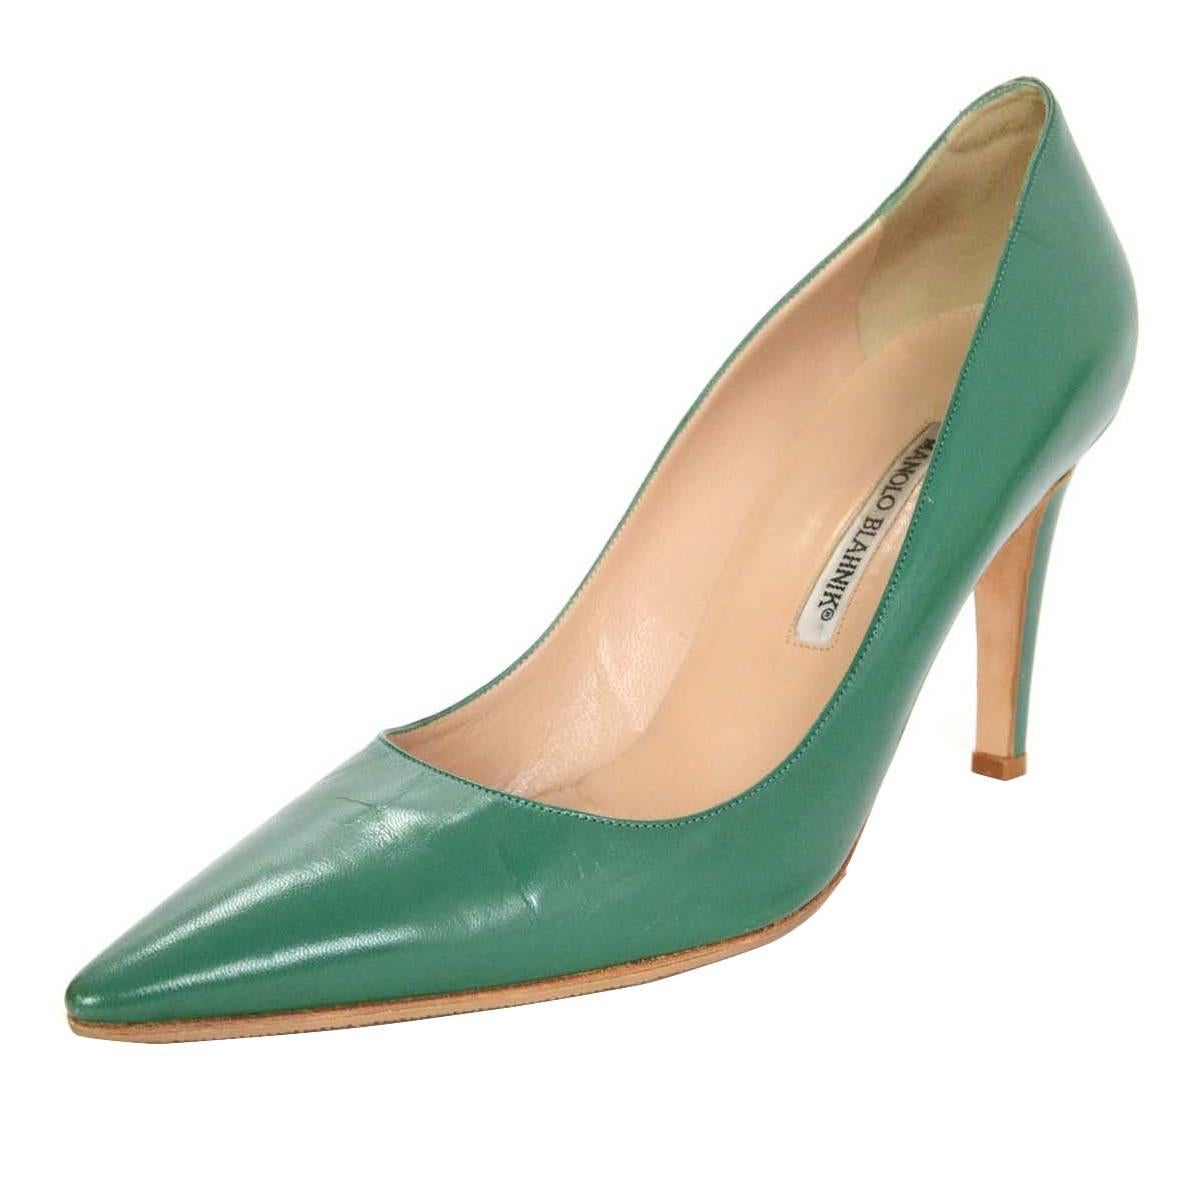 Manolo Blahnik Green Leather Pointed Pumps Sz 40.5